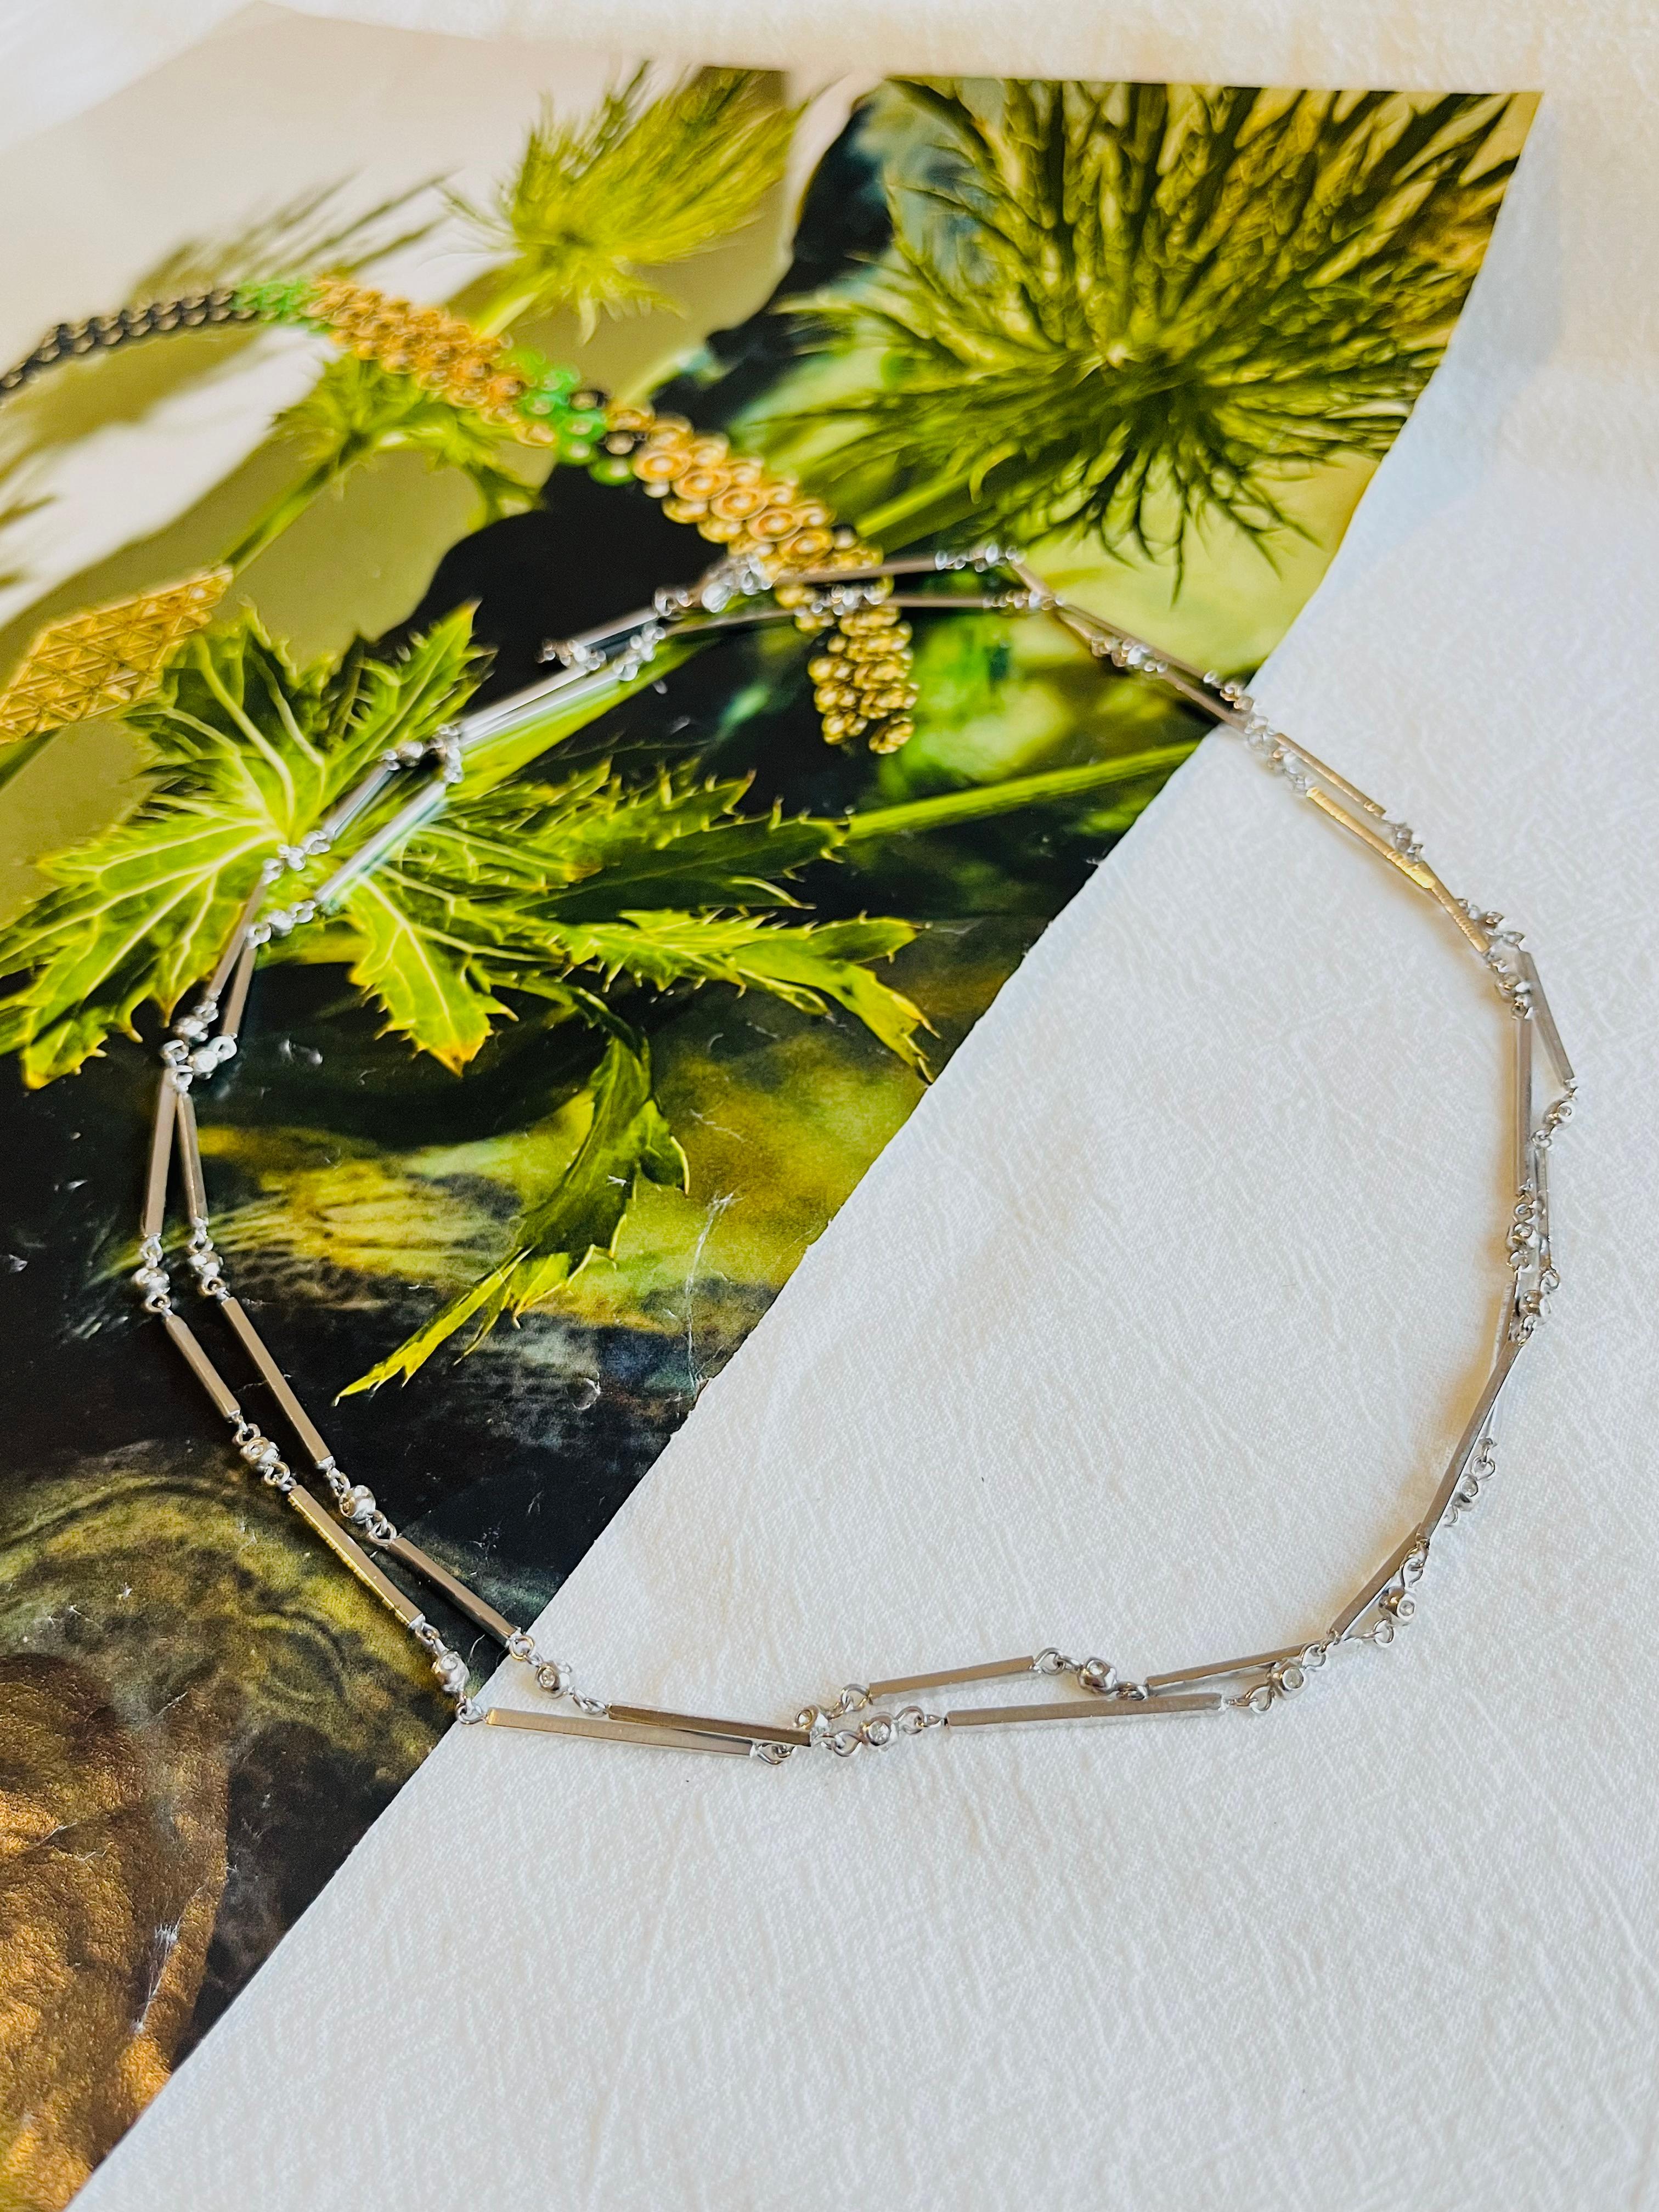 Christian Dior Vintage 1980s White Crystals Long Bar Versatile Silver Necklace In Excellent Condition For Sale In Wokingham, England